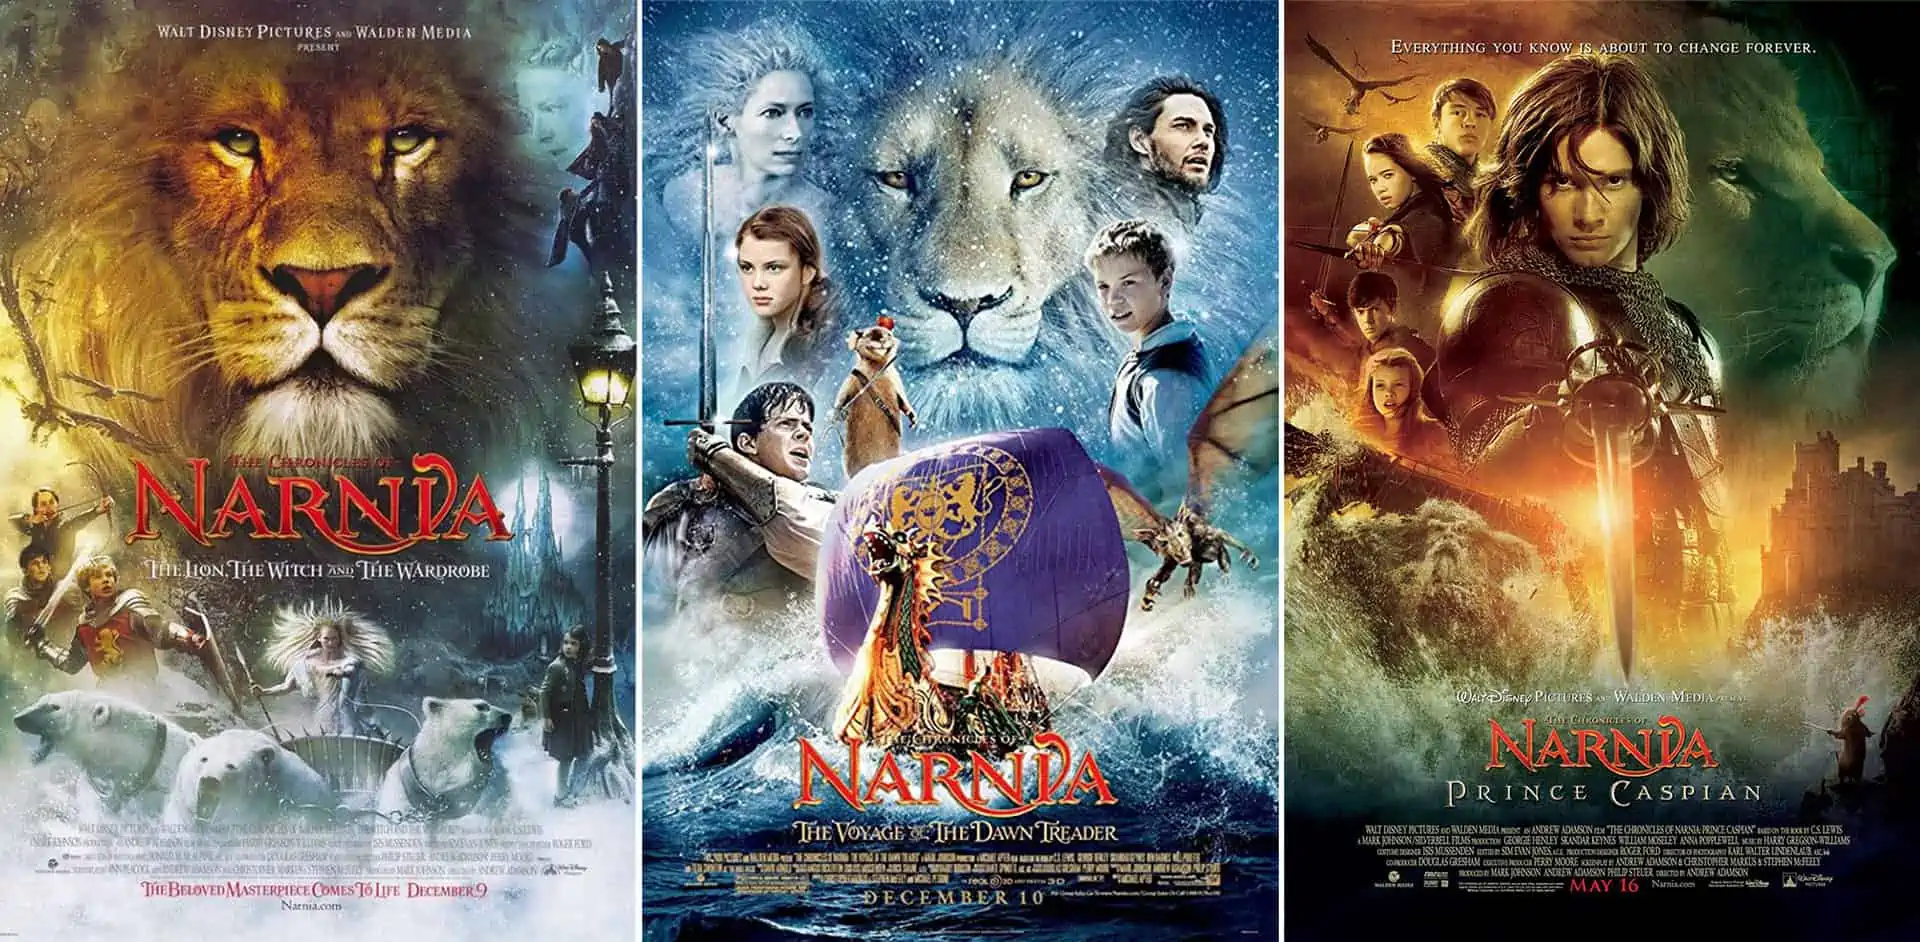 The Chronicles of Narnia: The Voyage of the Dawn Treader (2010) - News -  IMDb